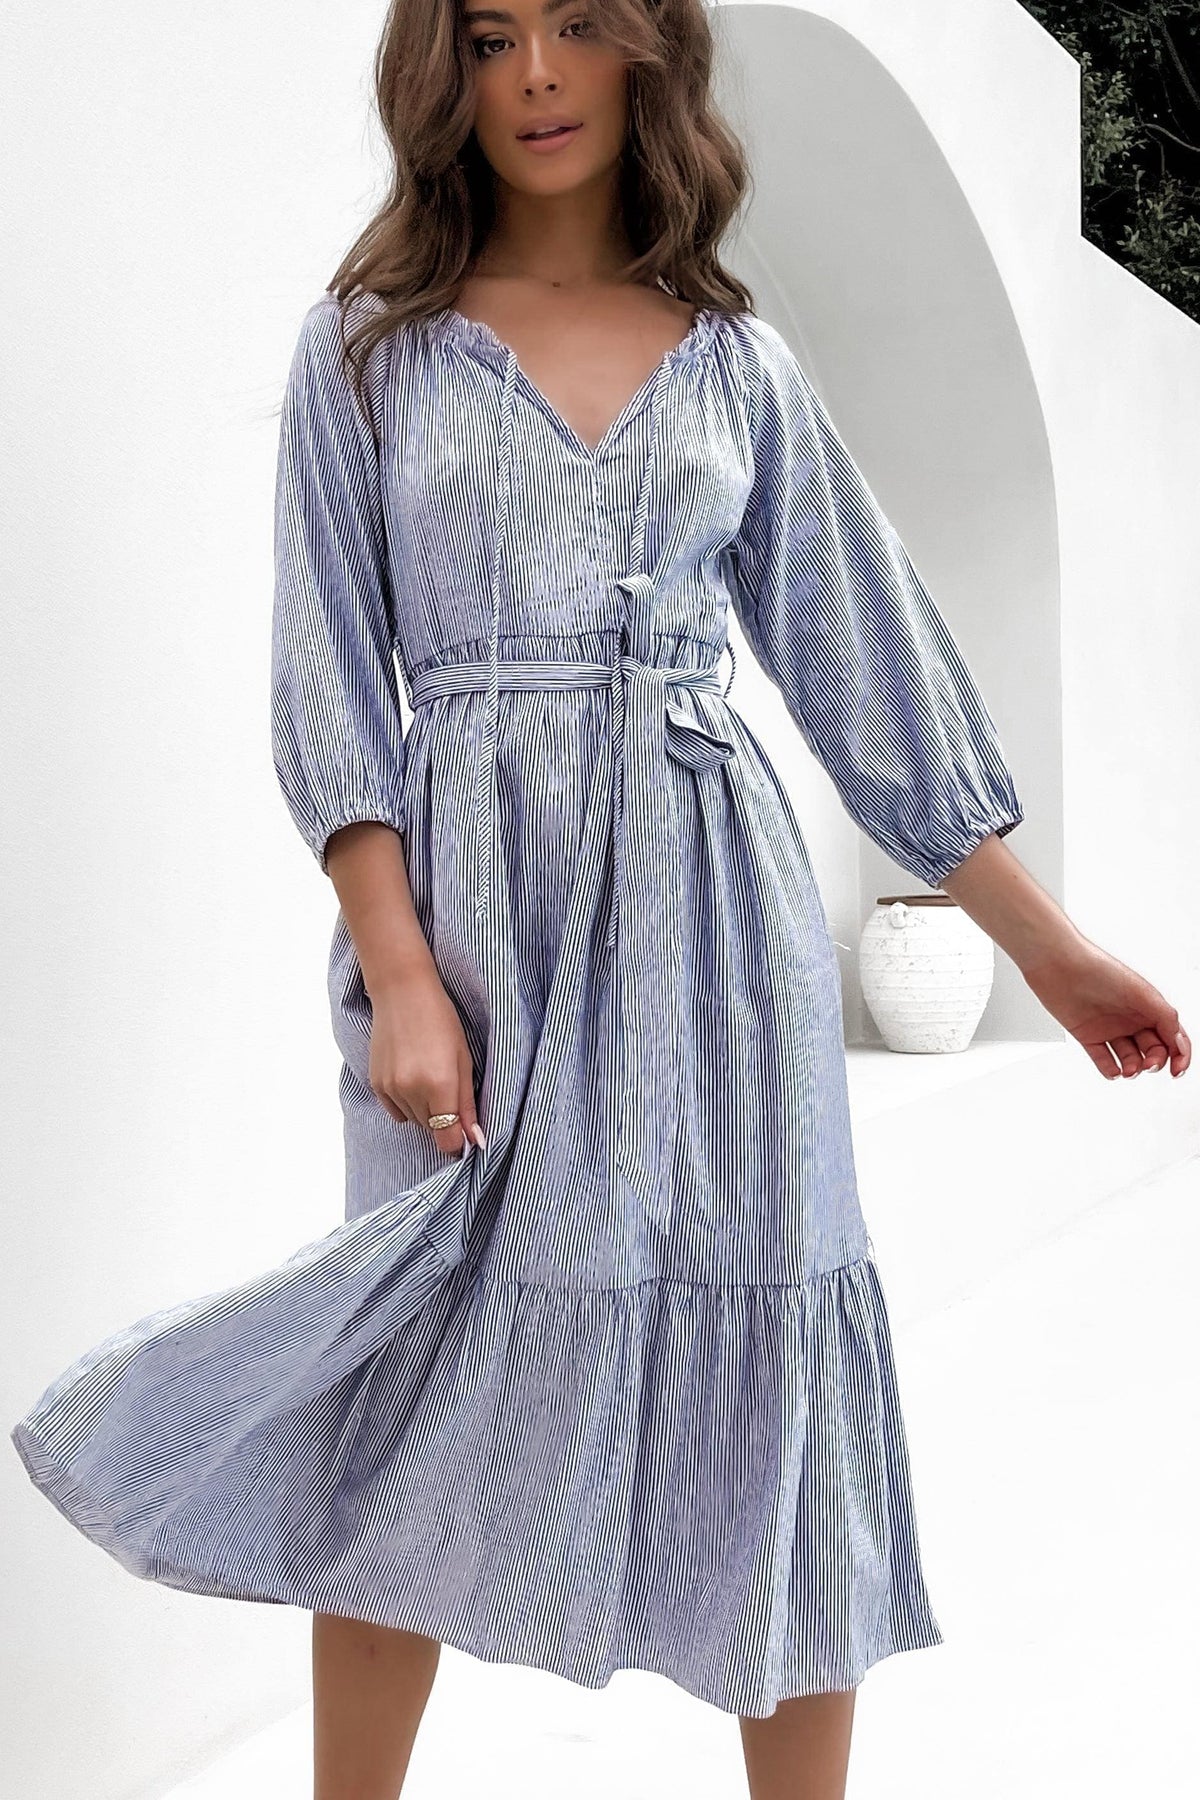 Tayia Dress, BAGGY, DRESS, DRESSES, LONG SLEEVE, MIDI DRESS, NEW ARRIVALS, PIN STRIPE, Sale, WAIST TIE, Tayia Dress only $61.00 @ MISHKAH ONLINE FASHION BOUTIQUE, Shop The Latest Women&#39;s Dresses - Our New Tayia Dress is only $61.00, @ MISHKAH ONLINE FASHION BOUTIQUE-MISHKAH